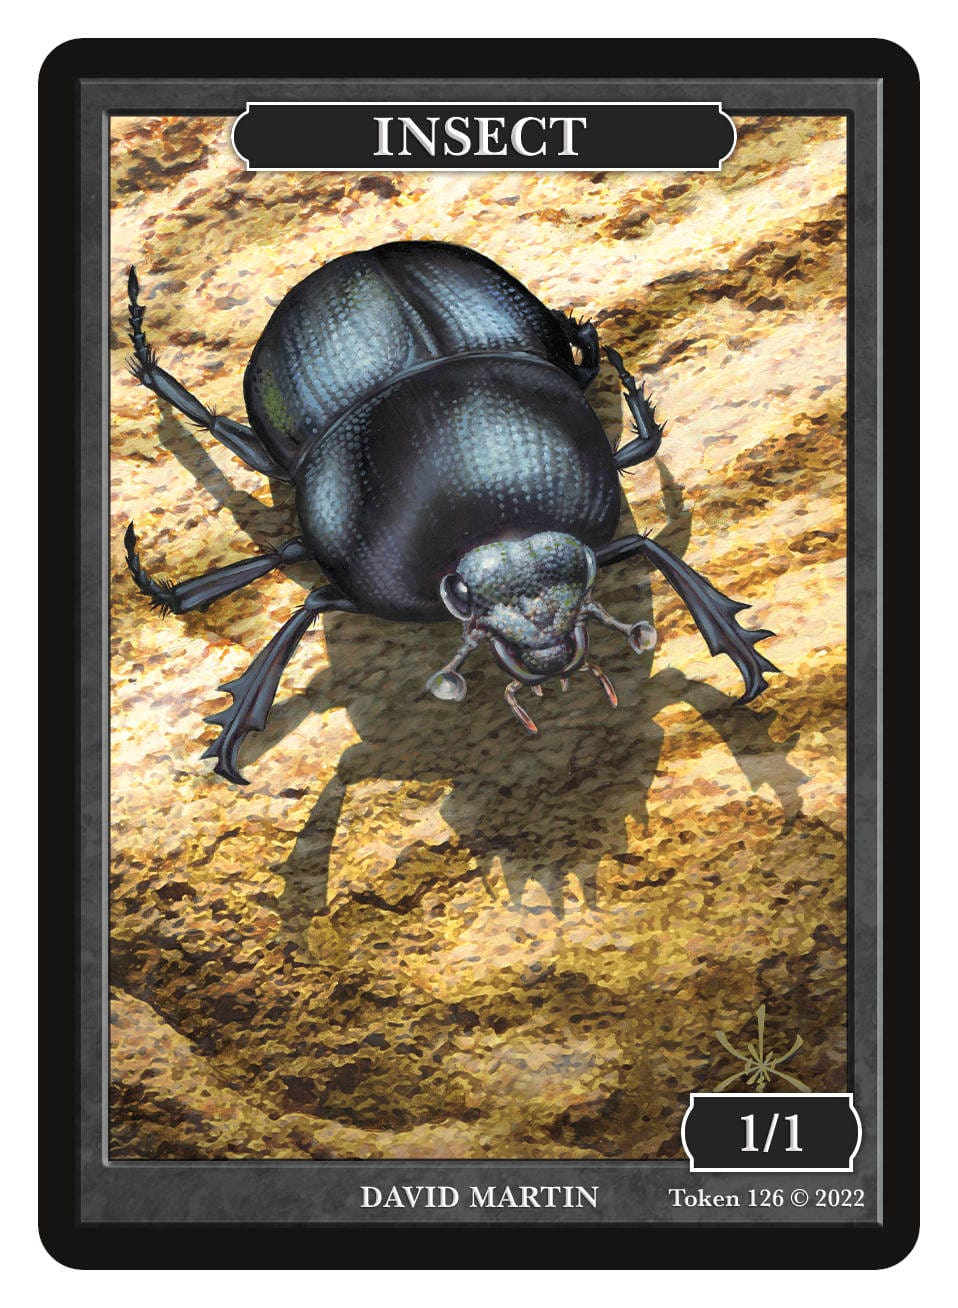 Insect Token (1/1) by David Martin